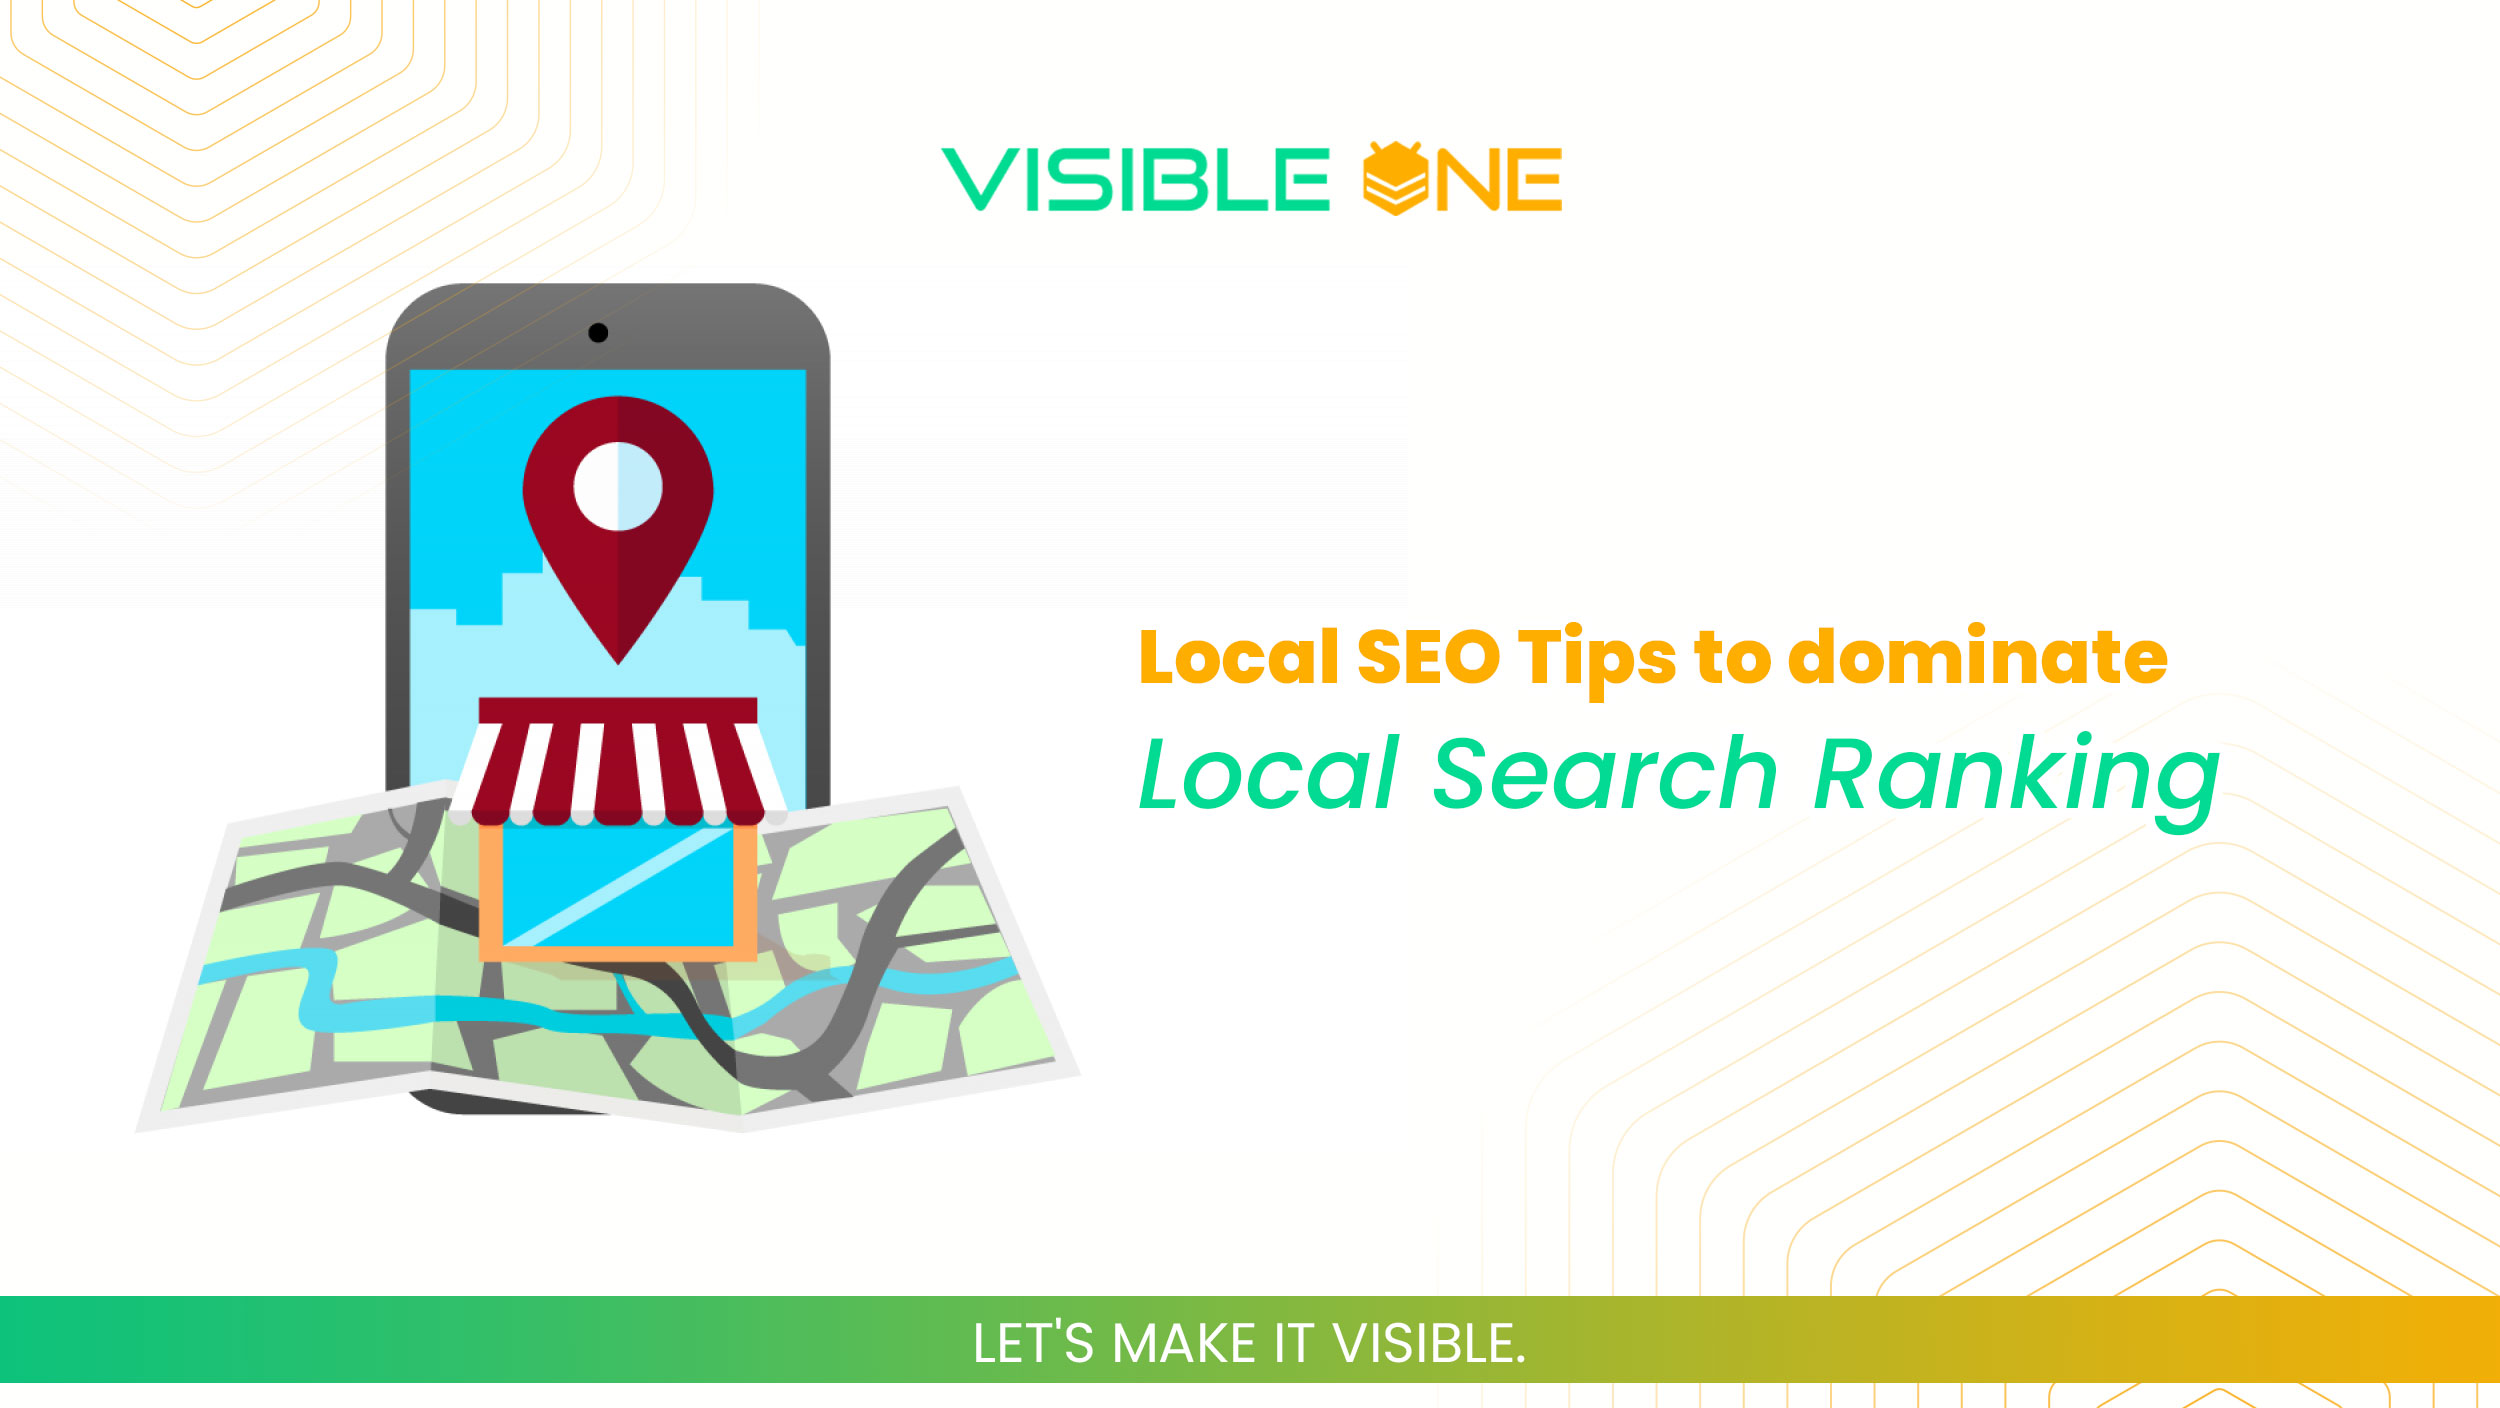 Local SEO Tips to dominate Local Search Ranking